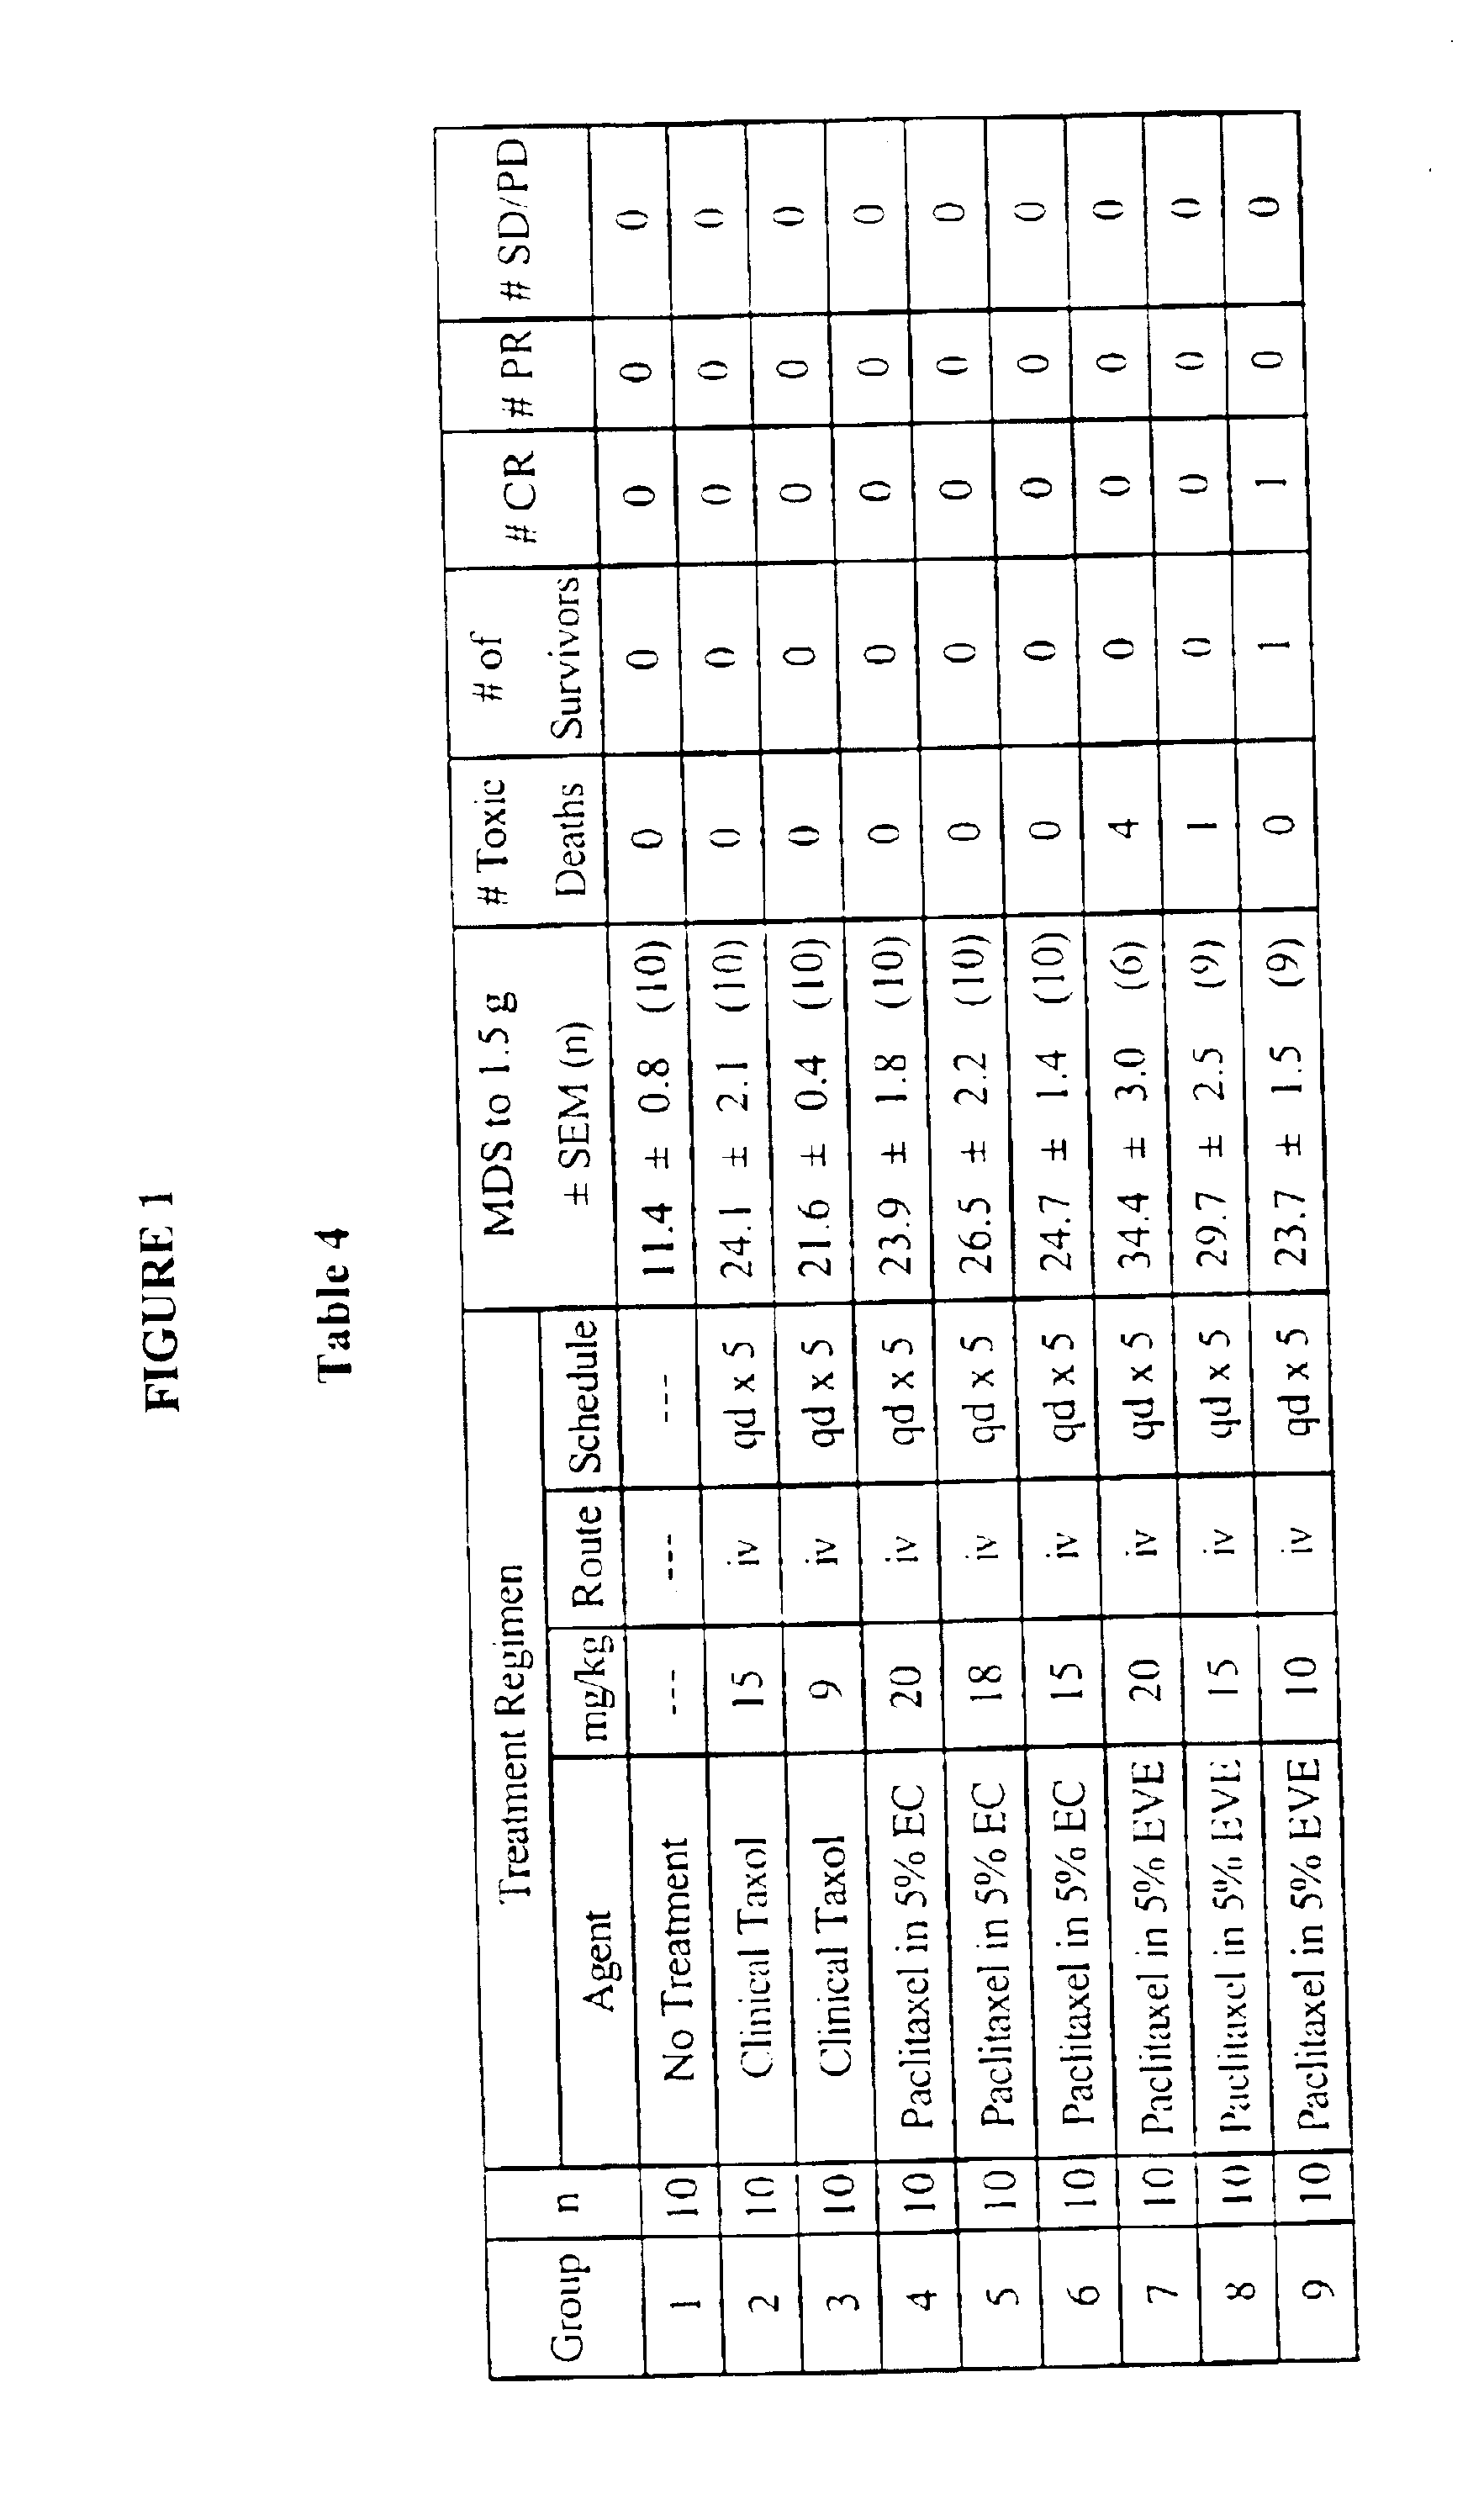 Methods for administration of paclitaxel